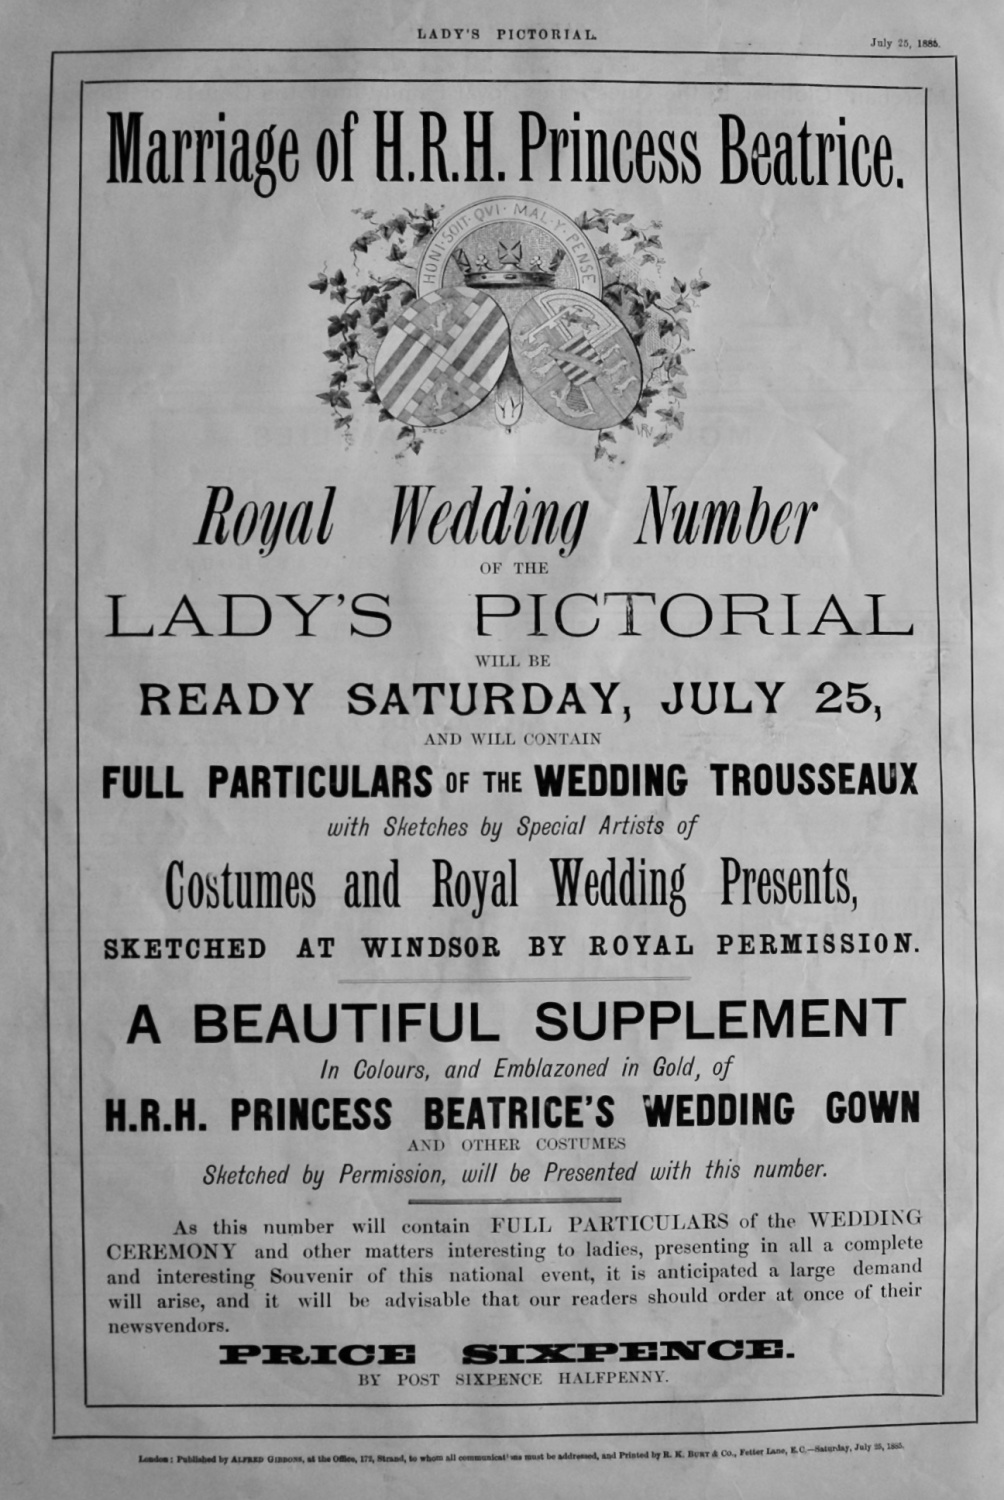 Marriage of H.R.H. Princess Beatrice.  Royal Wedding Number of the Lady's P